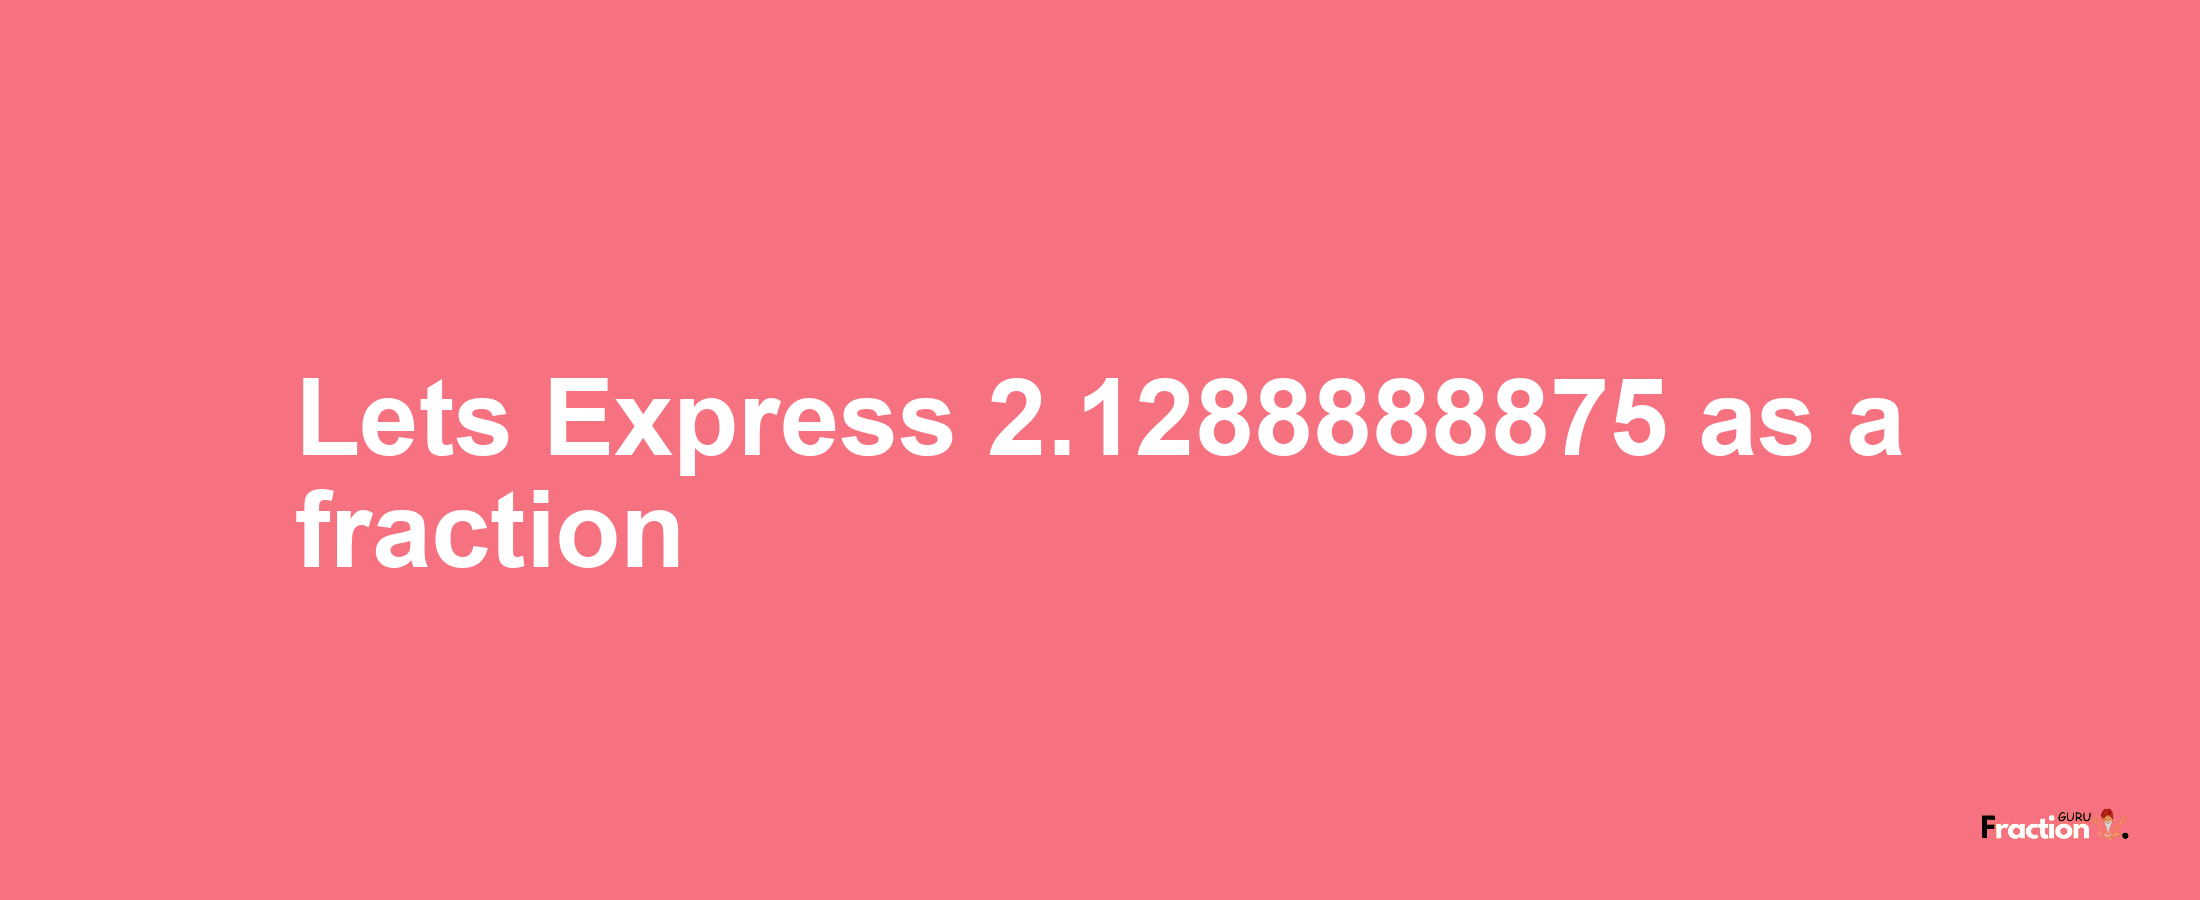 Lets Express 2.1288888875 as afraction